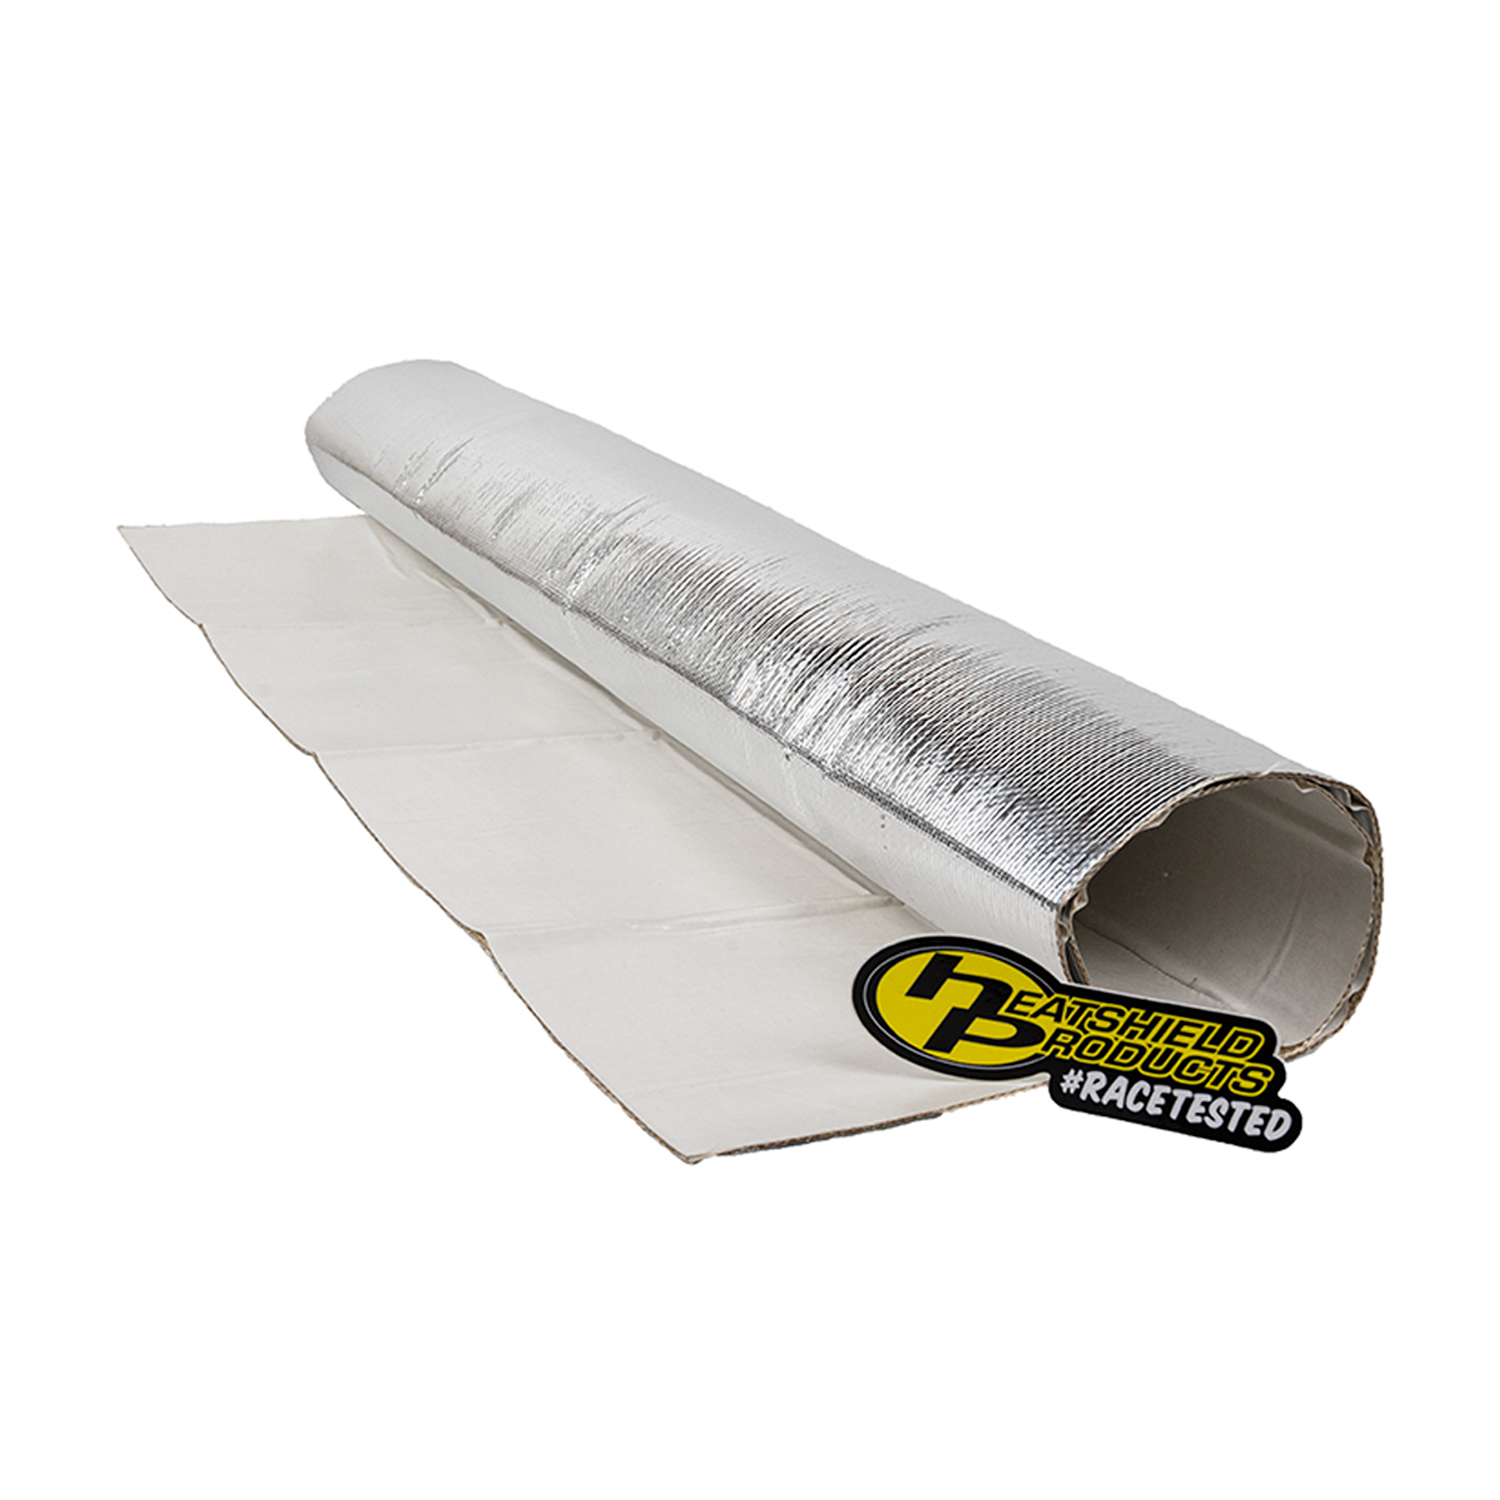 Reflects heat up to 90%, Rugged fiberglass material, Great for hoods & panels - 721202